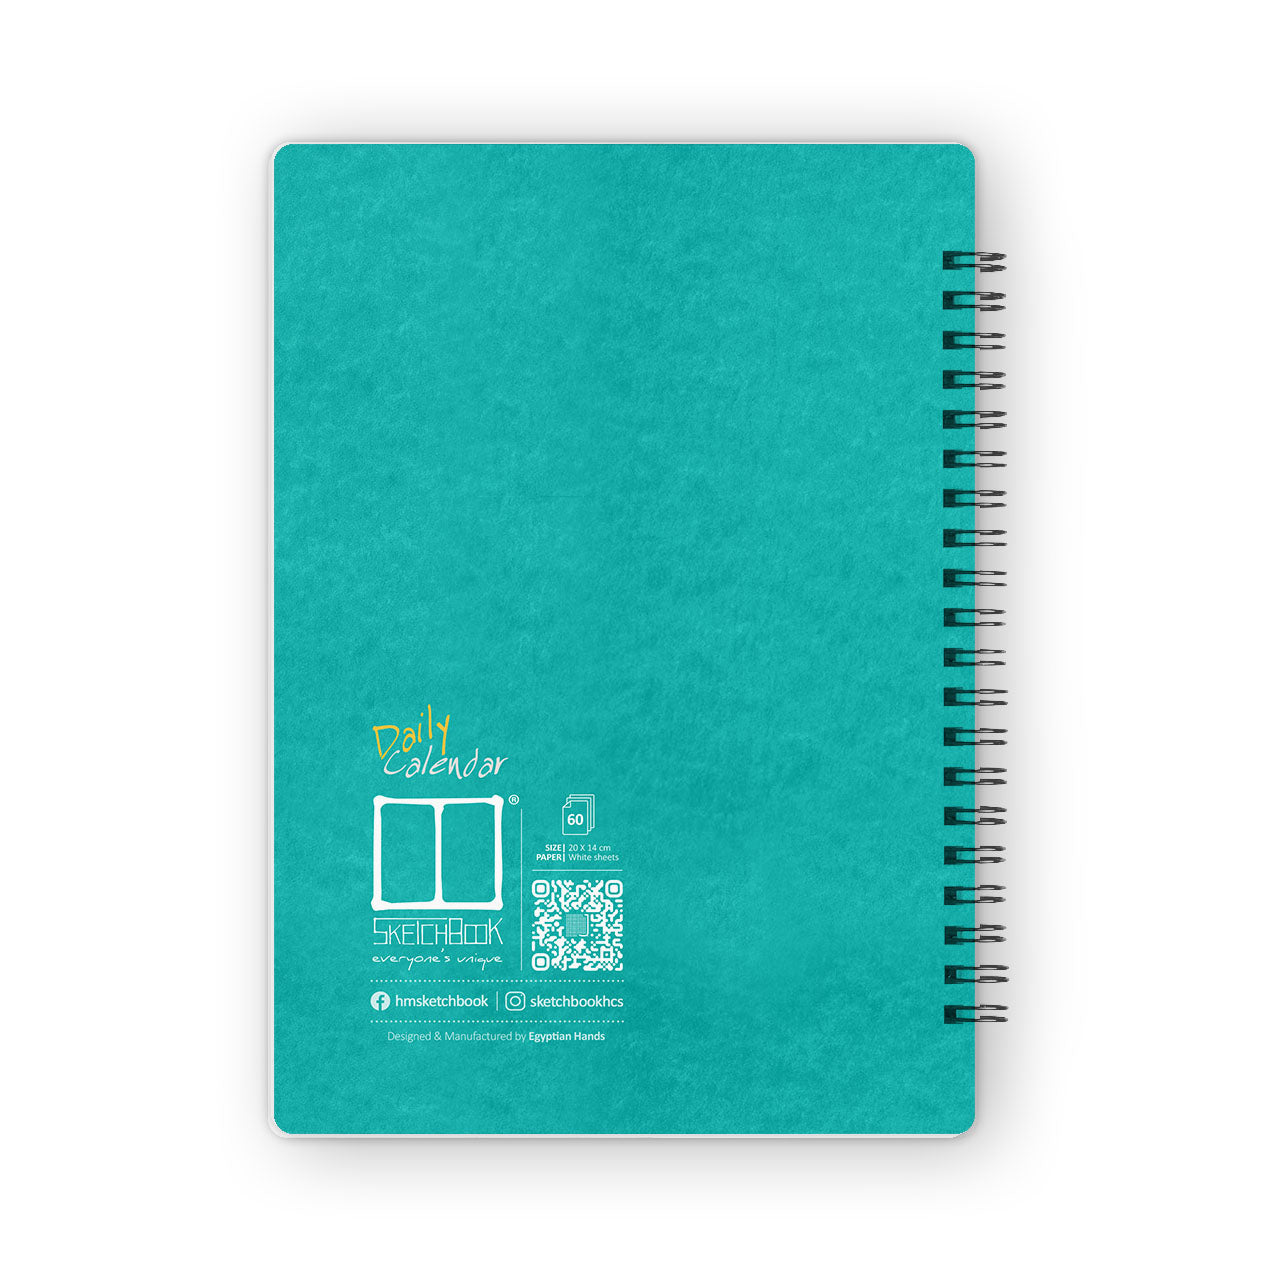 Daily Calendar Planner (60 Days) | 20 X 14 cm - Memories Blue (New) - from SketchBook Stationery